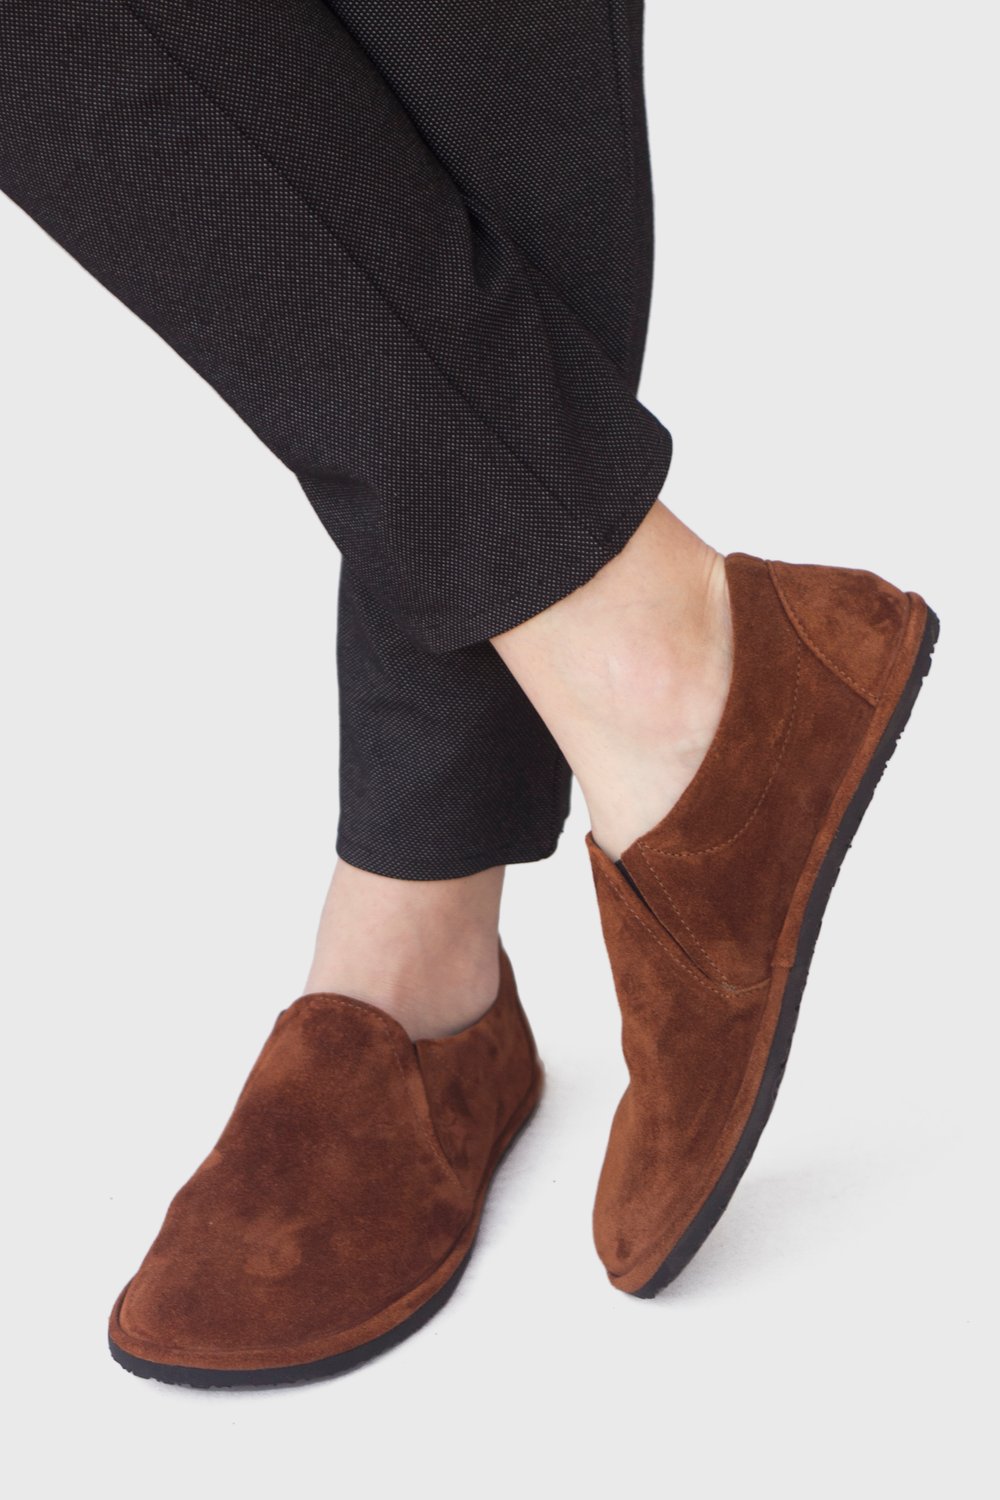 Image of Slip-On Sneakers in Spice Suede